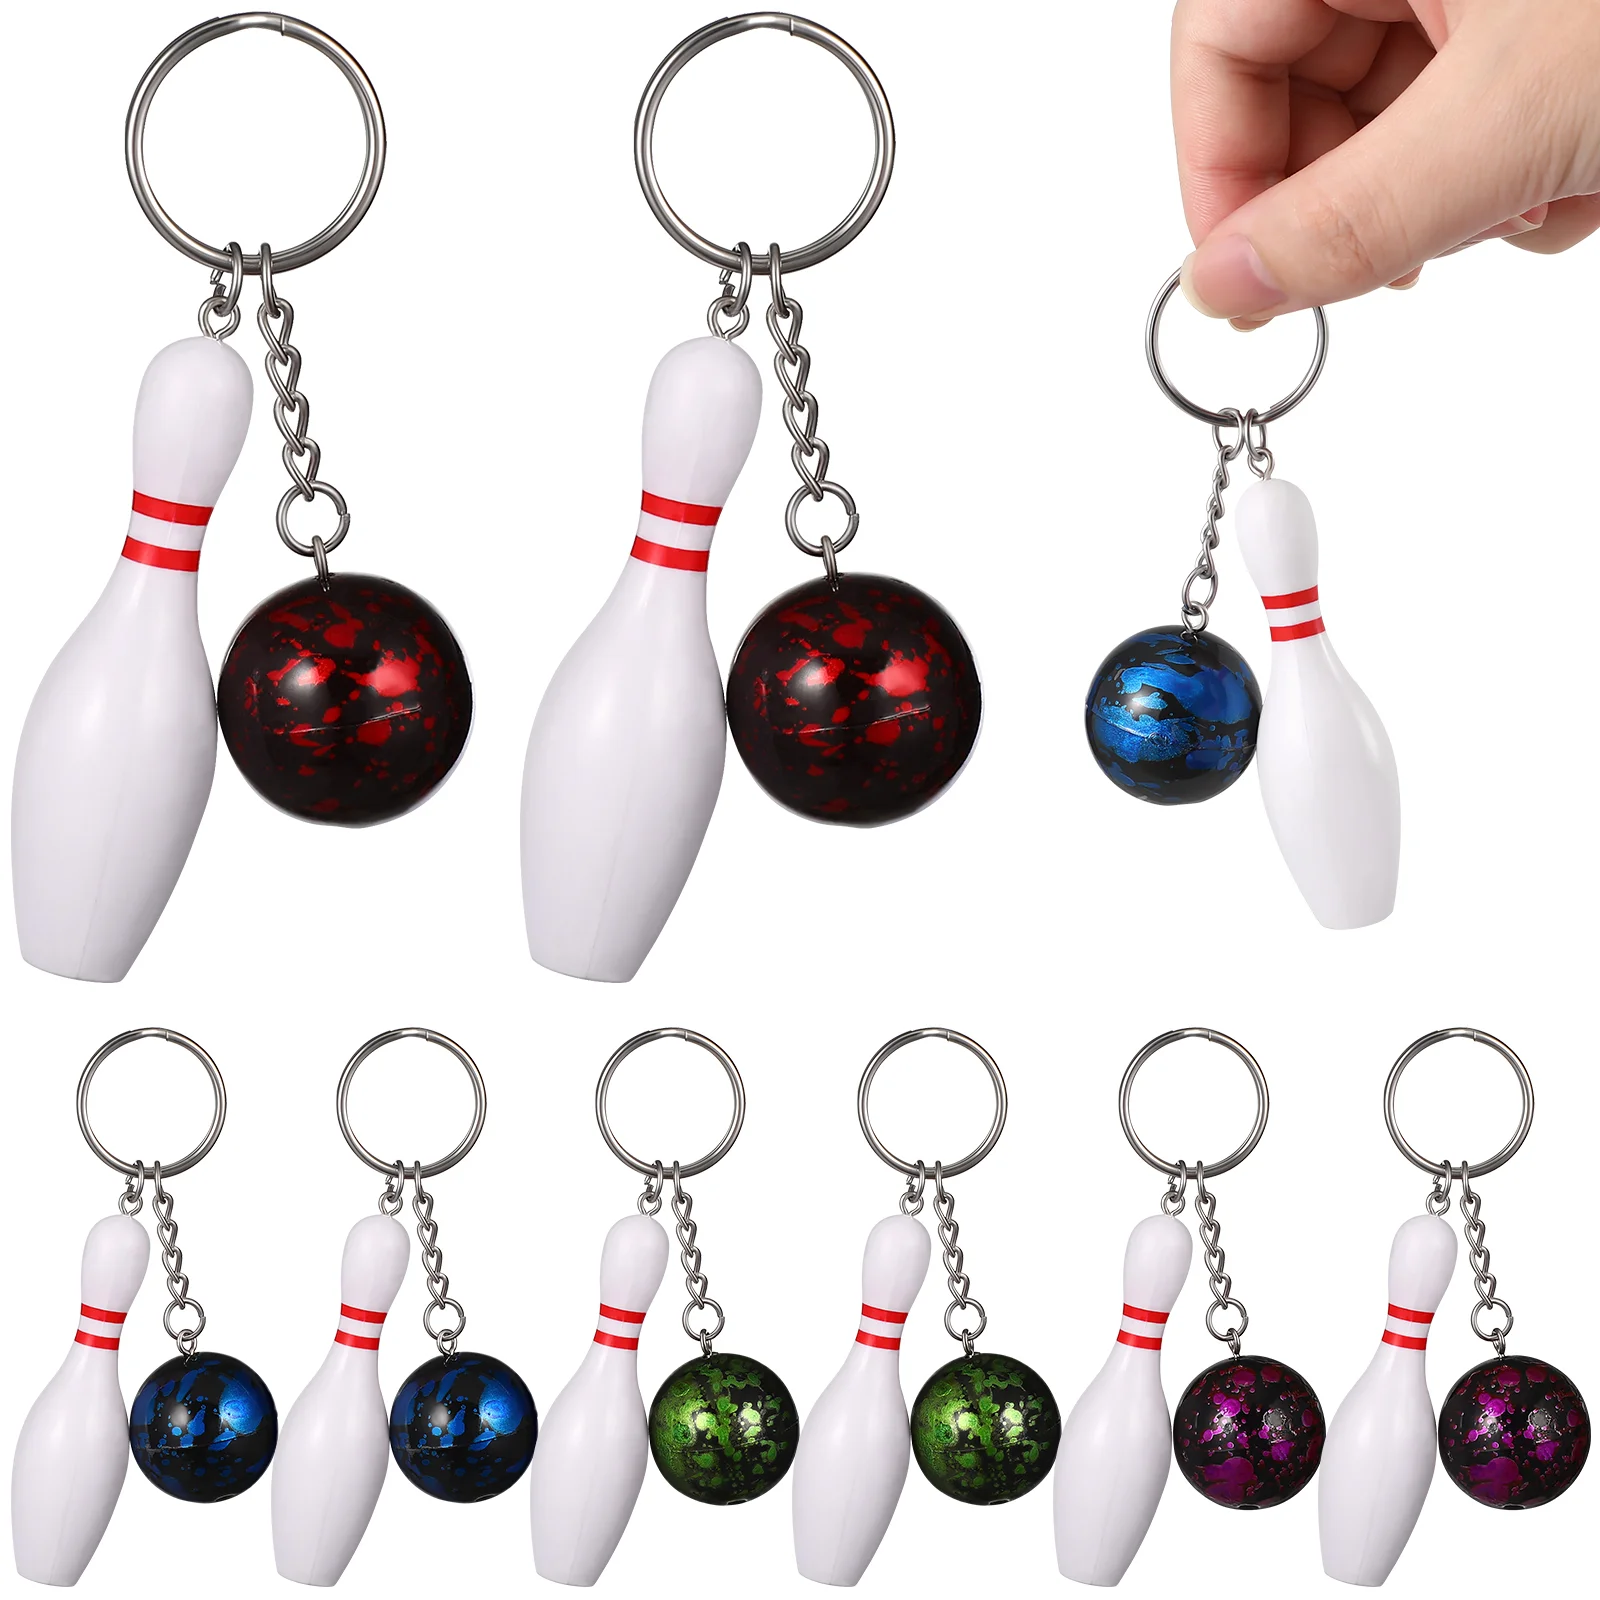 

Bowling Pendant Key Party Pin Ball Accessories Favors Mini Decorations Gifts Holder Rings Keys Pins Men Ring Kids Car Hanging